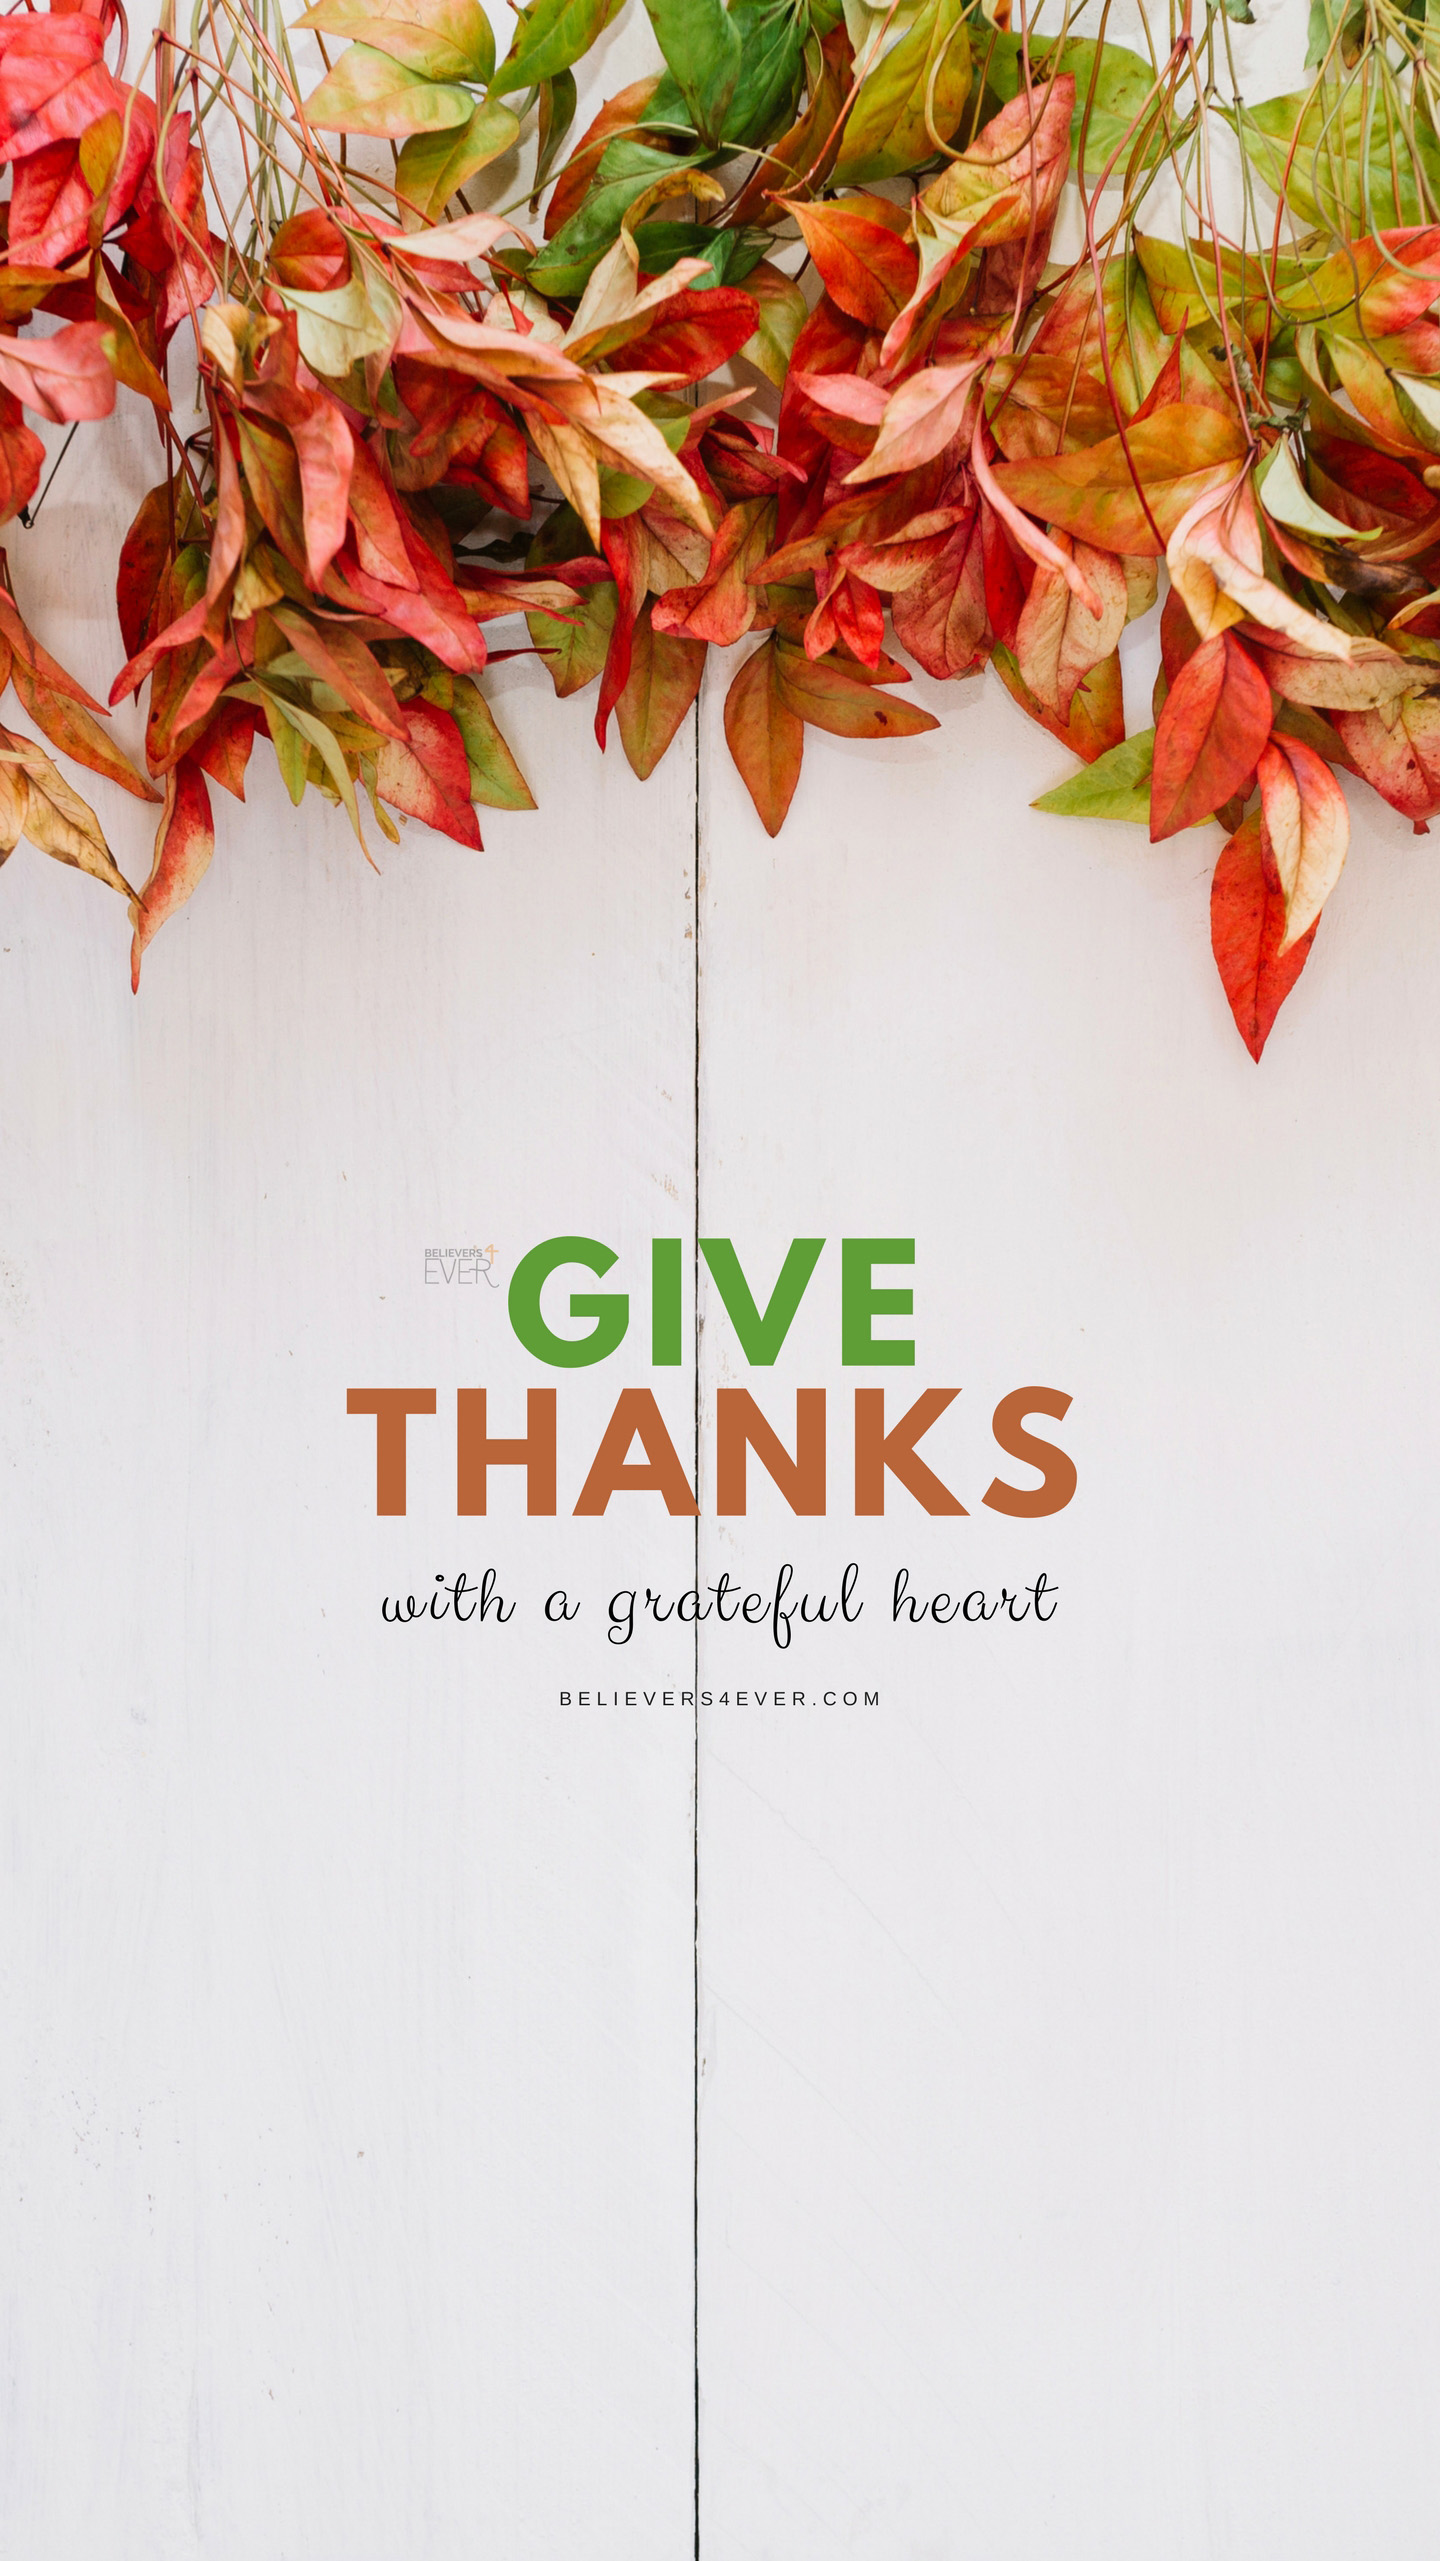 Give Thanks Mobile Thanksgiving Wallpaper - Give Thanks With A Grateful Heart Banner - HD Wallpaper 